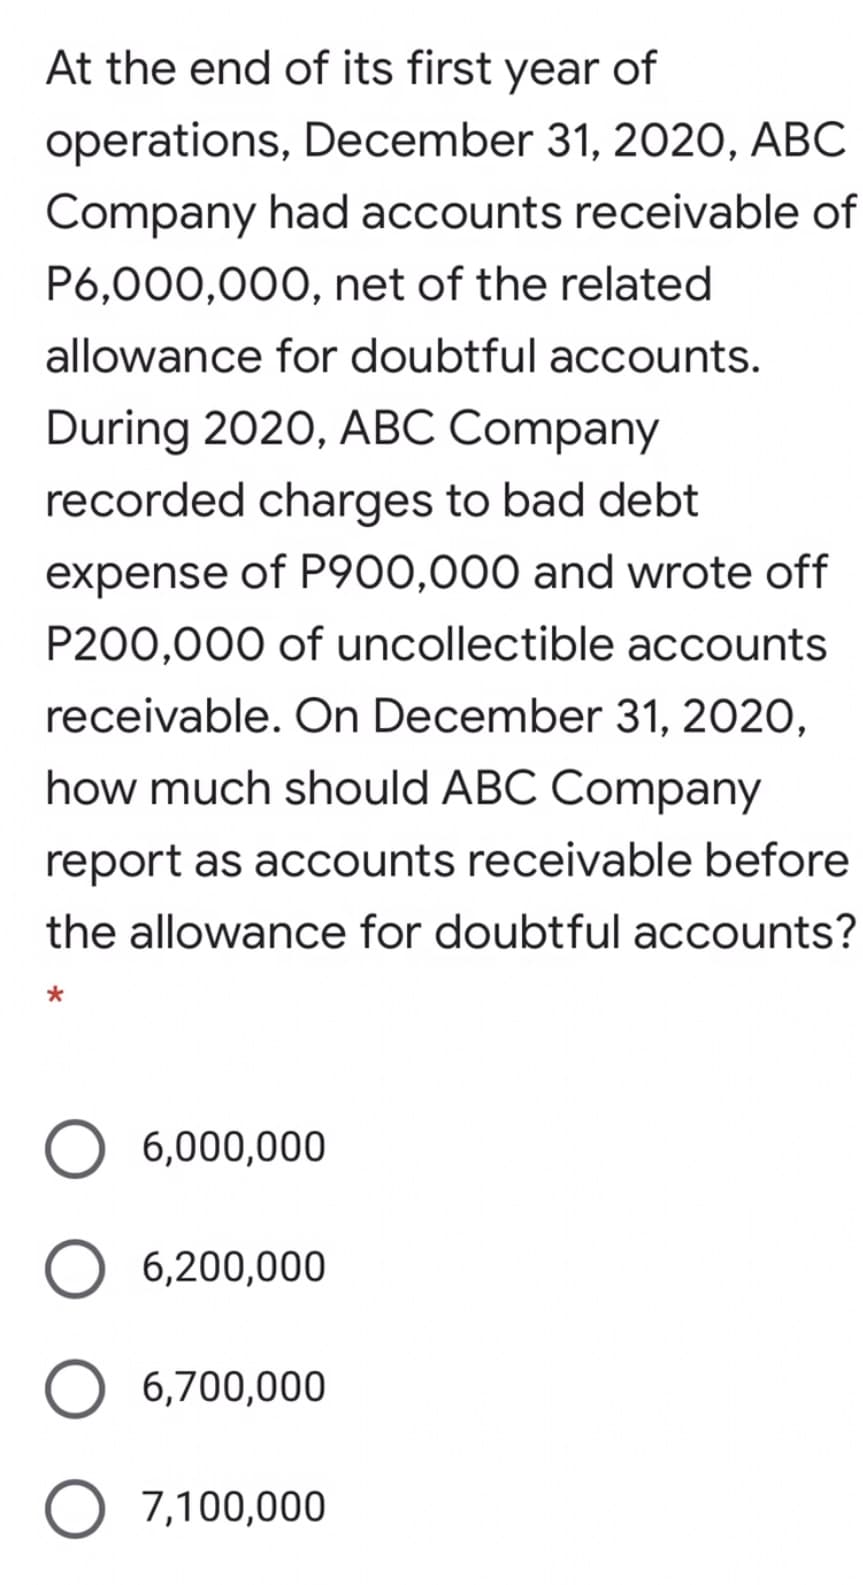 At the end of its first year of
operations, December 31, 2020, ABC
Company had accounts receivable of
P6,000,000, net of the related
allowance for doubtful accounts.
During 2020, ABC Company
recorded charges to bad debt
expense of P900,000 and wrote off
P200,000 of uncollectible accounts
receivable. On December 31, 2020,
how much should ABC Company
report as accounts receivable before
the allowance for doubtful accounts?
O 6,000,000
O 6,200,000
6,700,000
7,100,000
